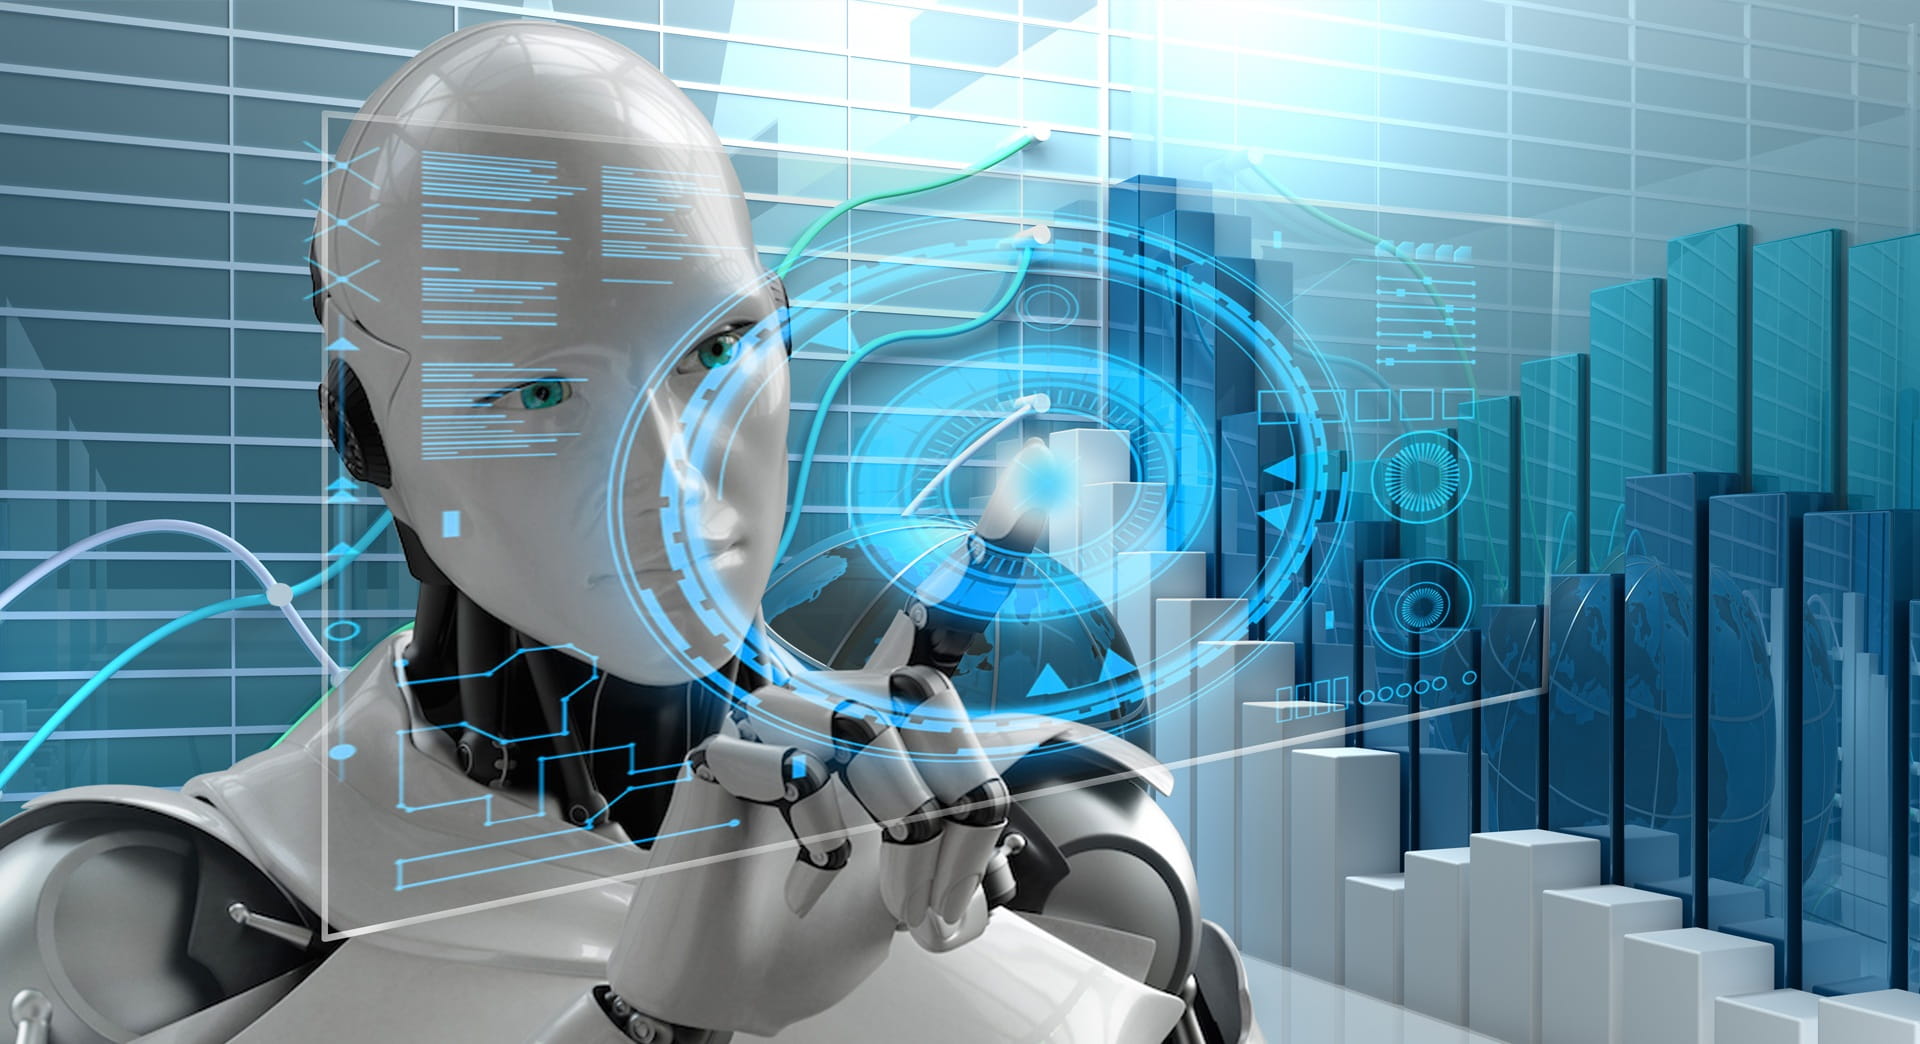 What Is Robotic Process Automation?